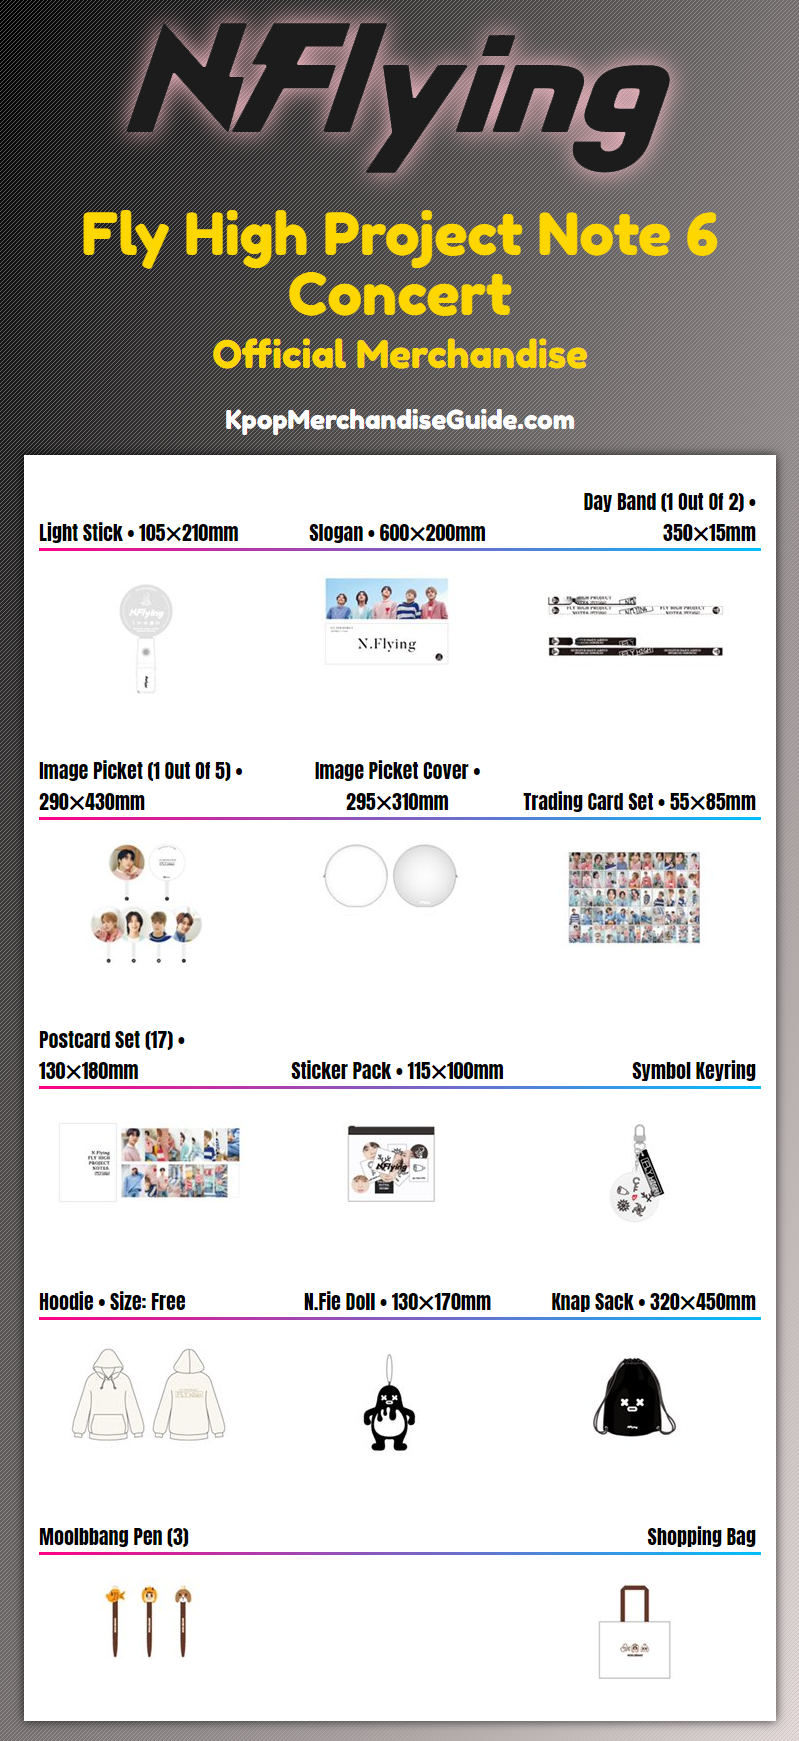 N.Flying Fly High Project Note 6 Concert Merchandise